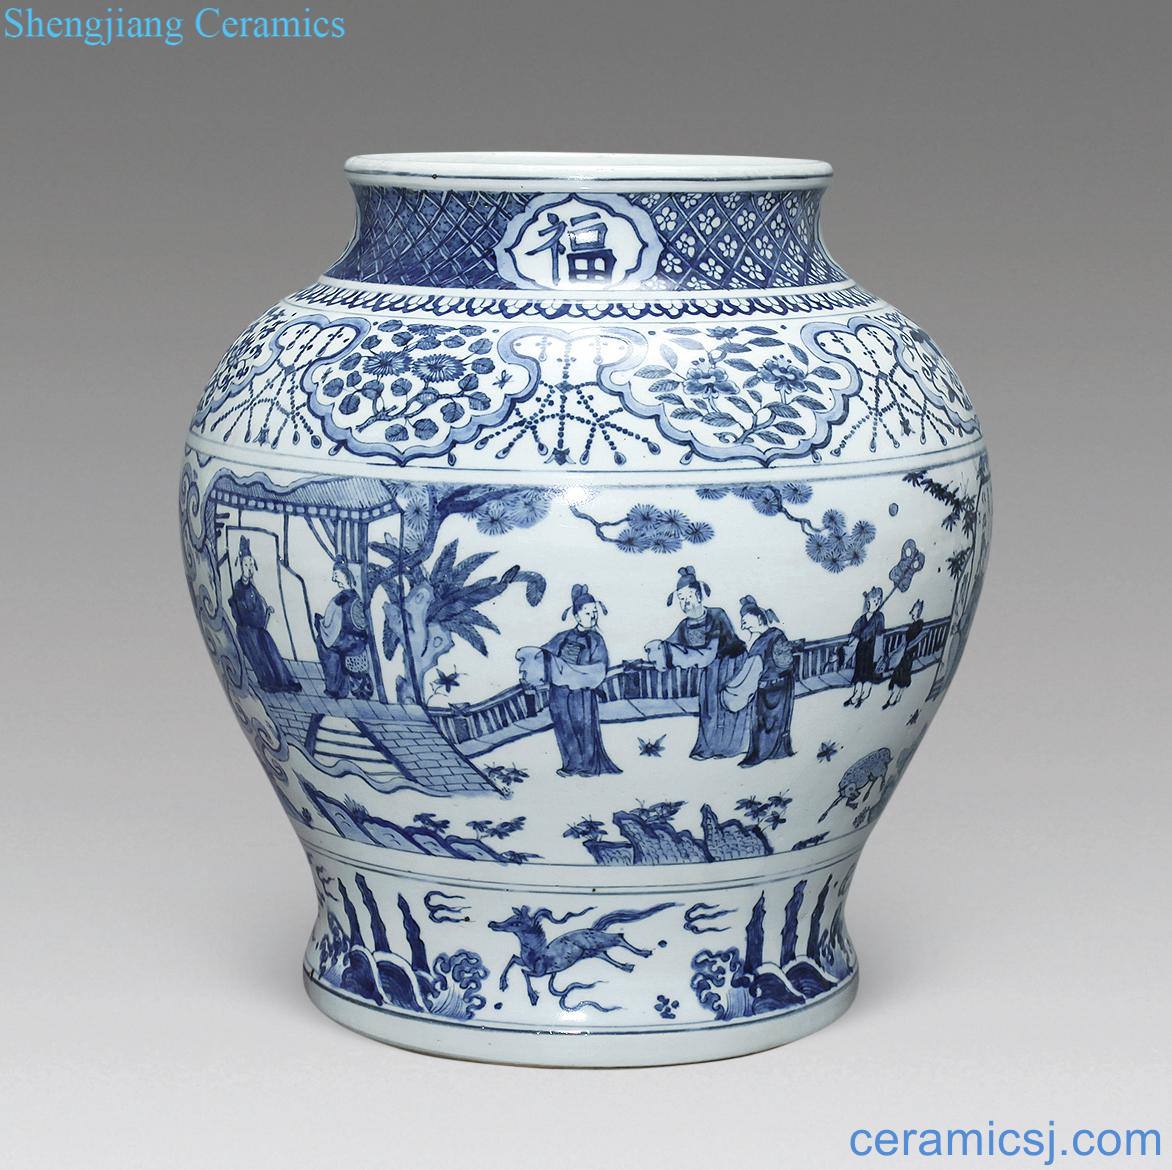 In the late Ming Blue and white figure 18 bachelor's big cans